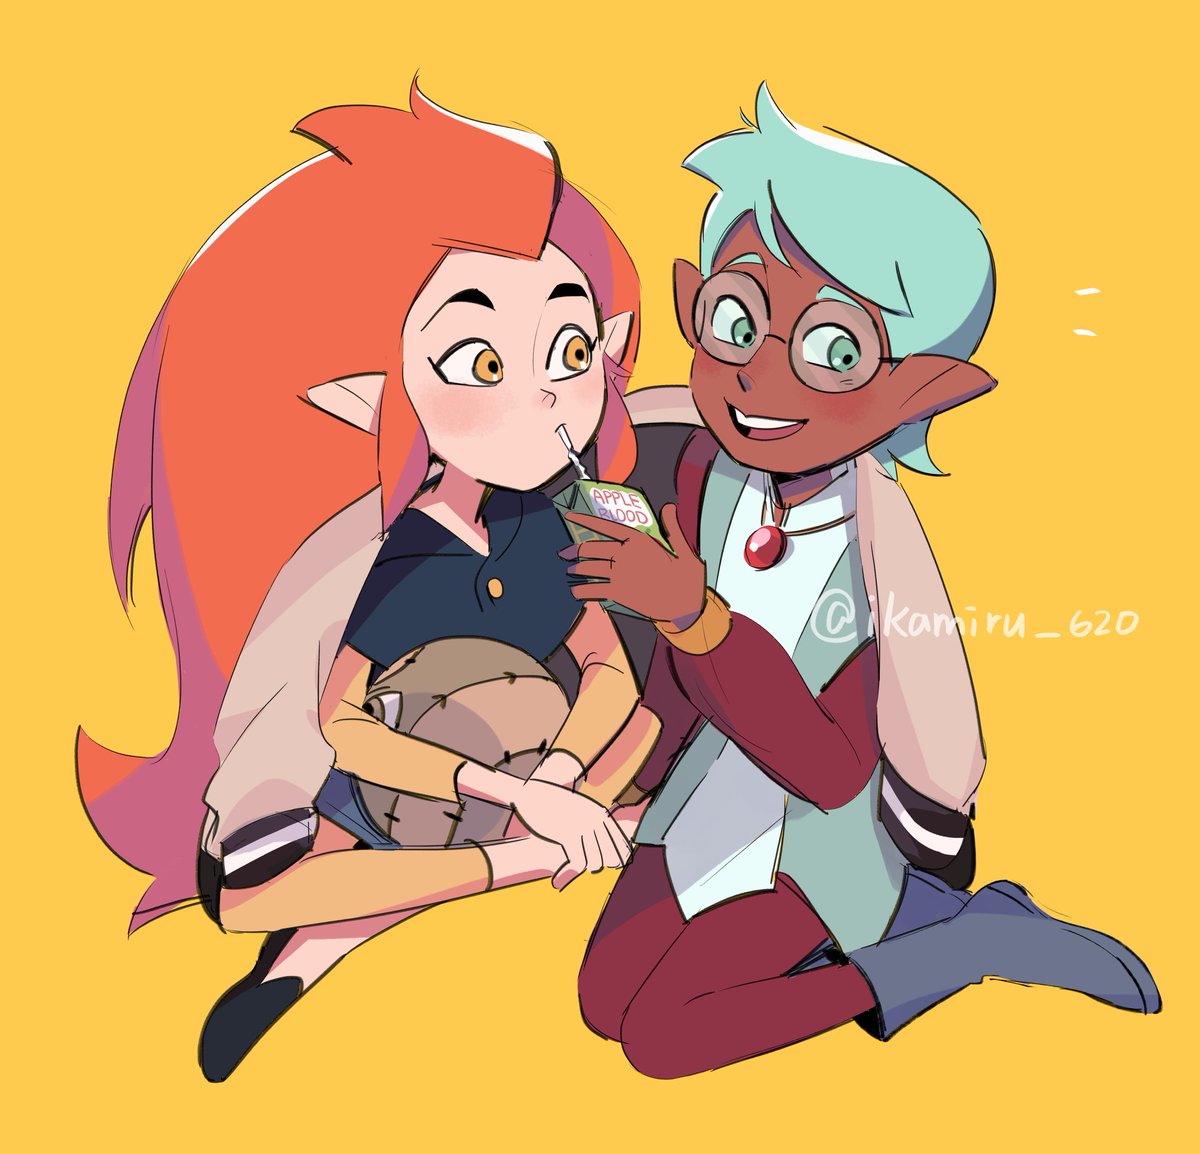 「they're way too cute 😭💓
#TheOwlHouse 」|PHのイラスト